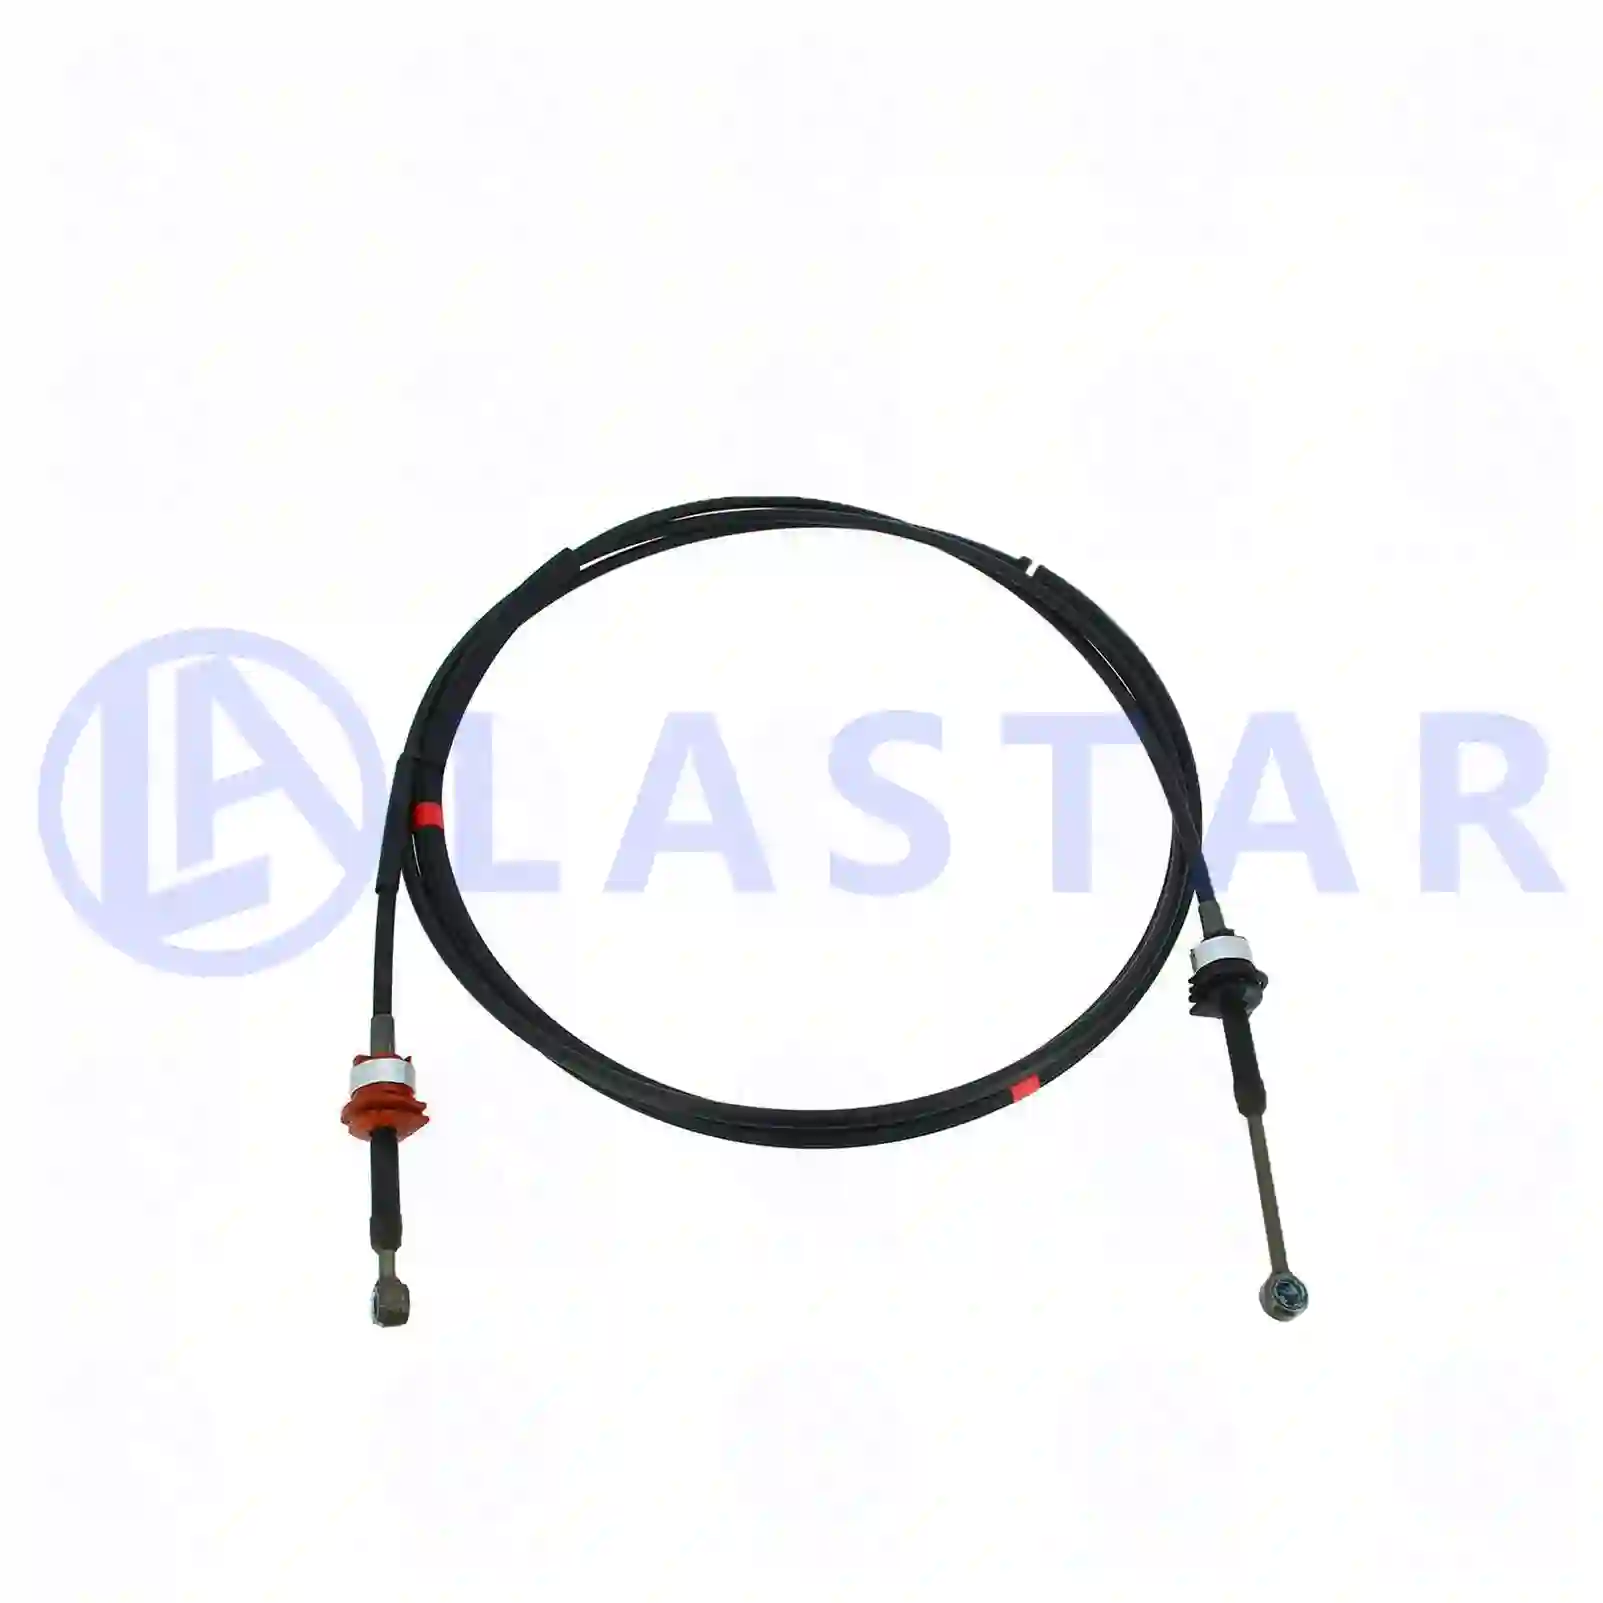 Control cable, switching, 77732706, 21002888, 2178971 ||  77732706 Lastar Spare Part | Truck Spare Parts, Auotomotive Spare Parts Control cable, switching, 77732706, 21002888, 2178971 ||  77732706 Lastar Spare Part | Truck Spare Parts, Auotomotive Spare Parts